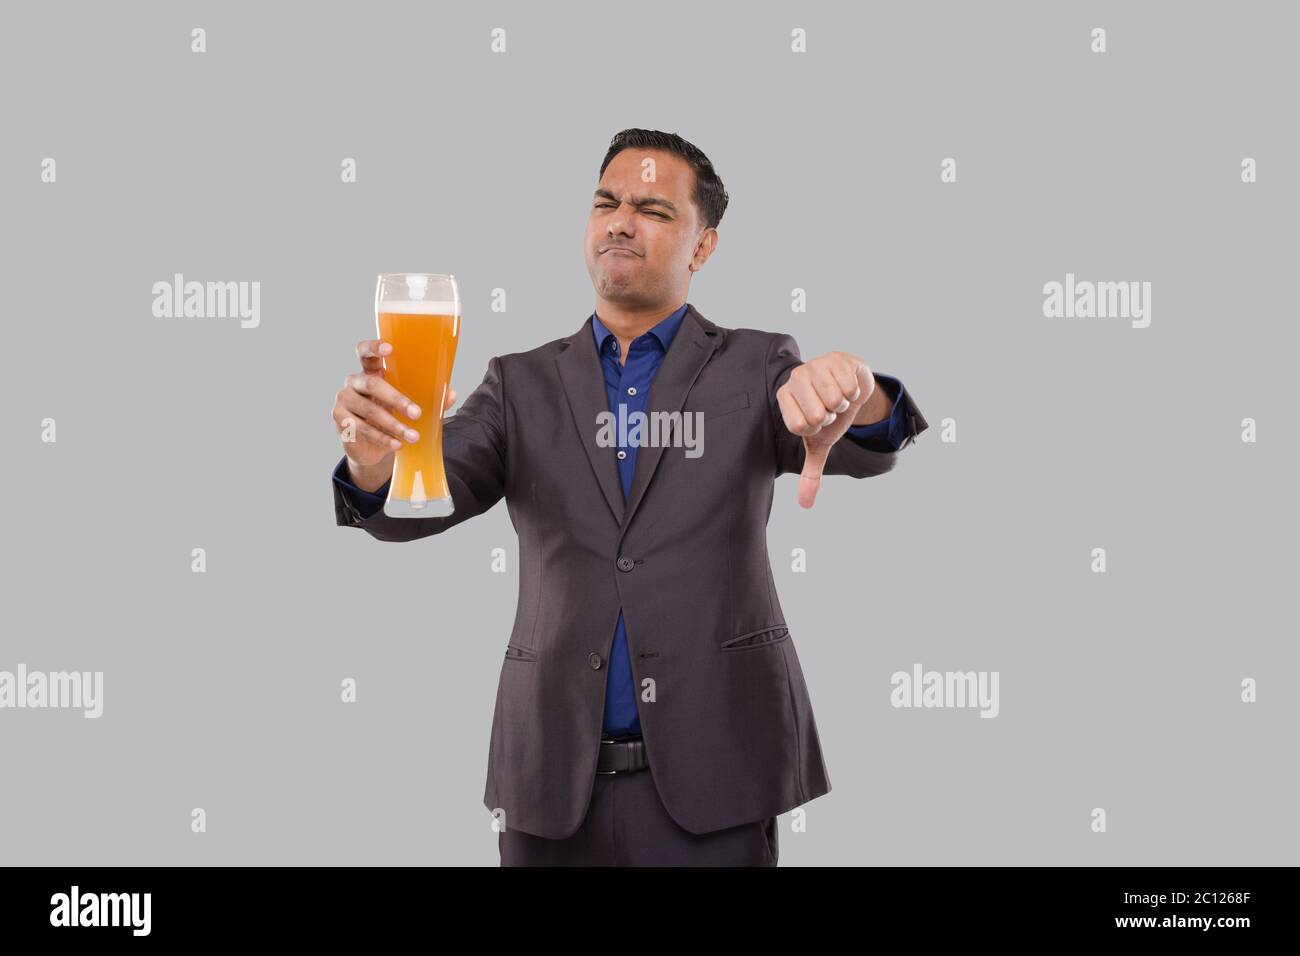 https://c8.alamy.com/comp/2C1268F/businessman-holding-beer-glass-showing-thumb-down-indian-business-man-with-beer-in-hand-2C1268F.jpg